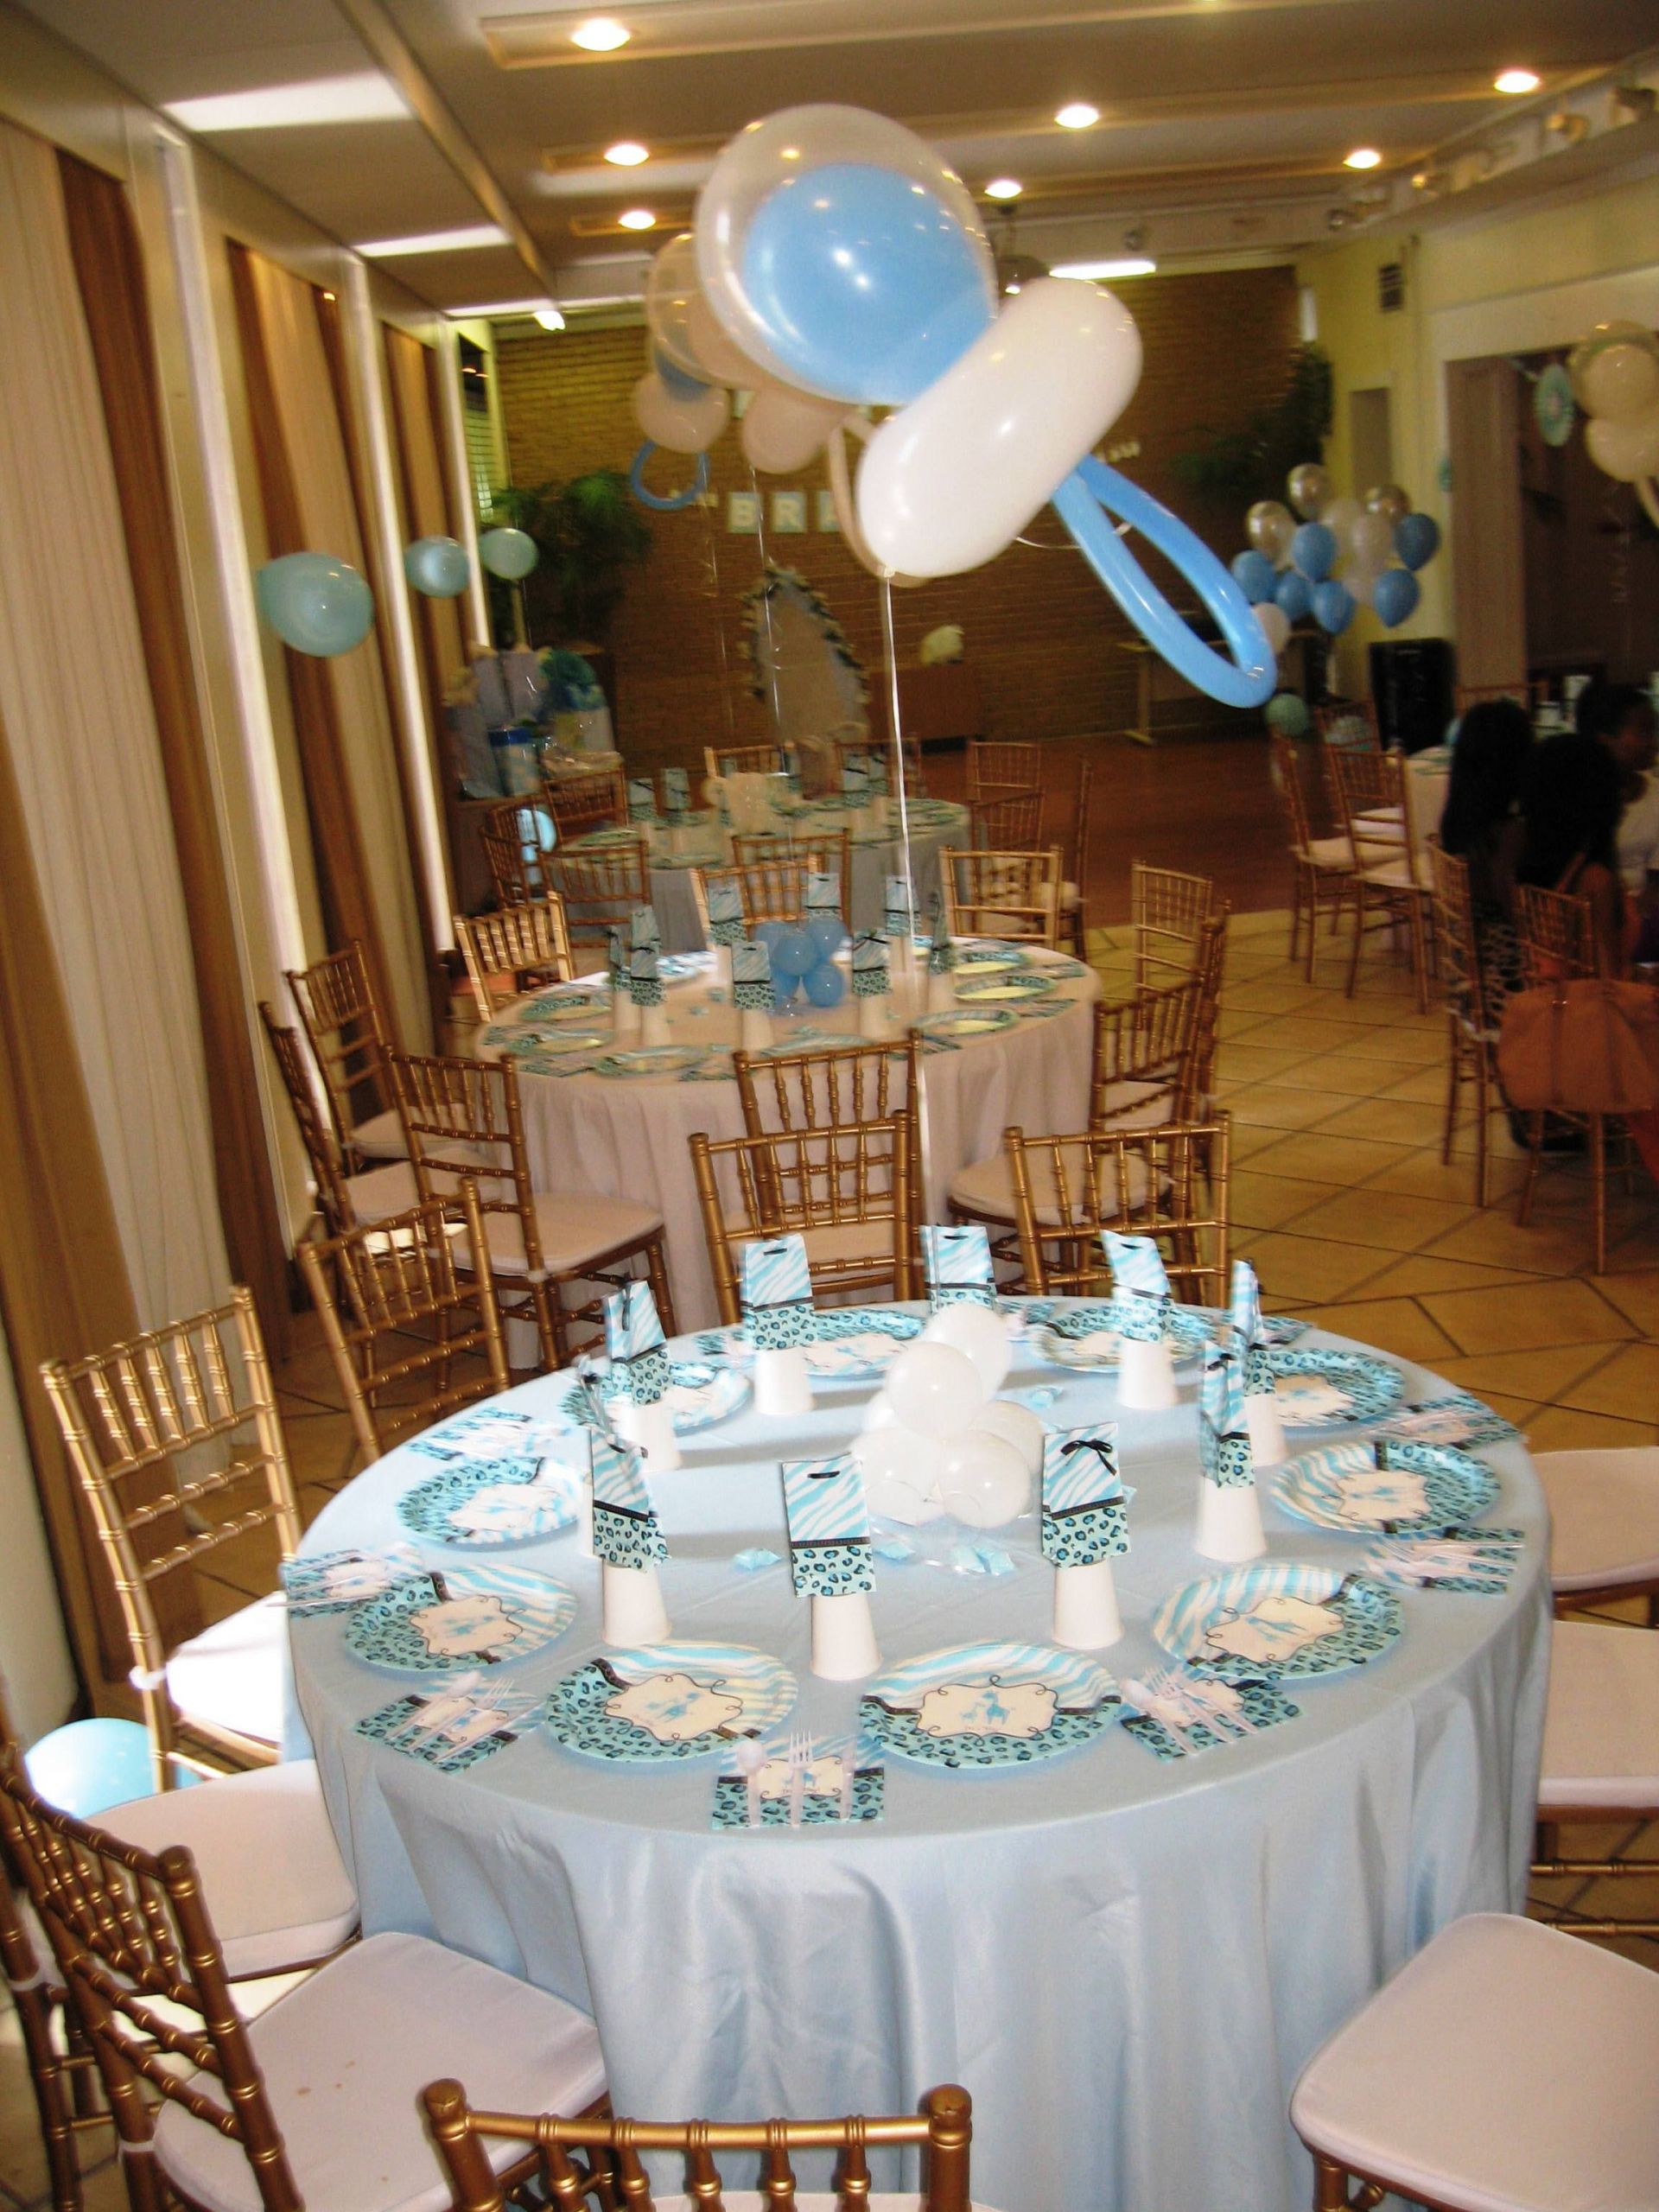 Decorating Ideas For Baby Shower Gift Table
 Baby Shower Table Decor